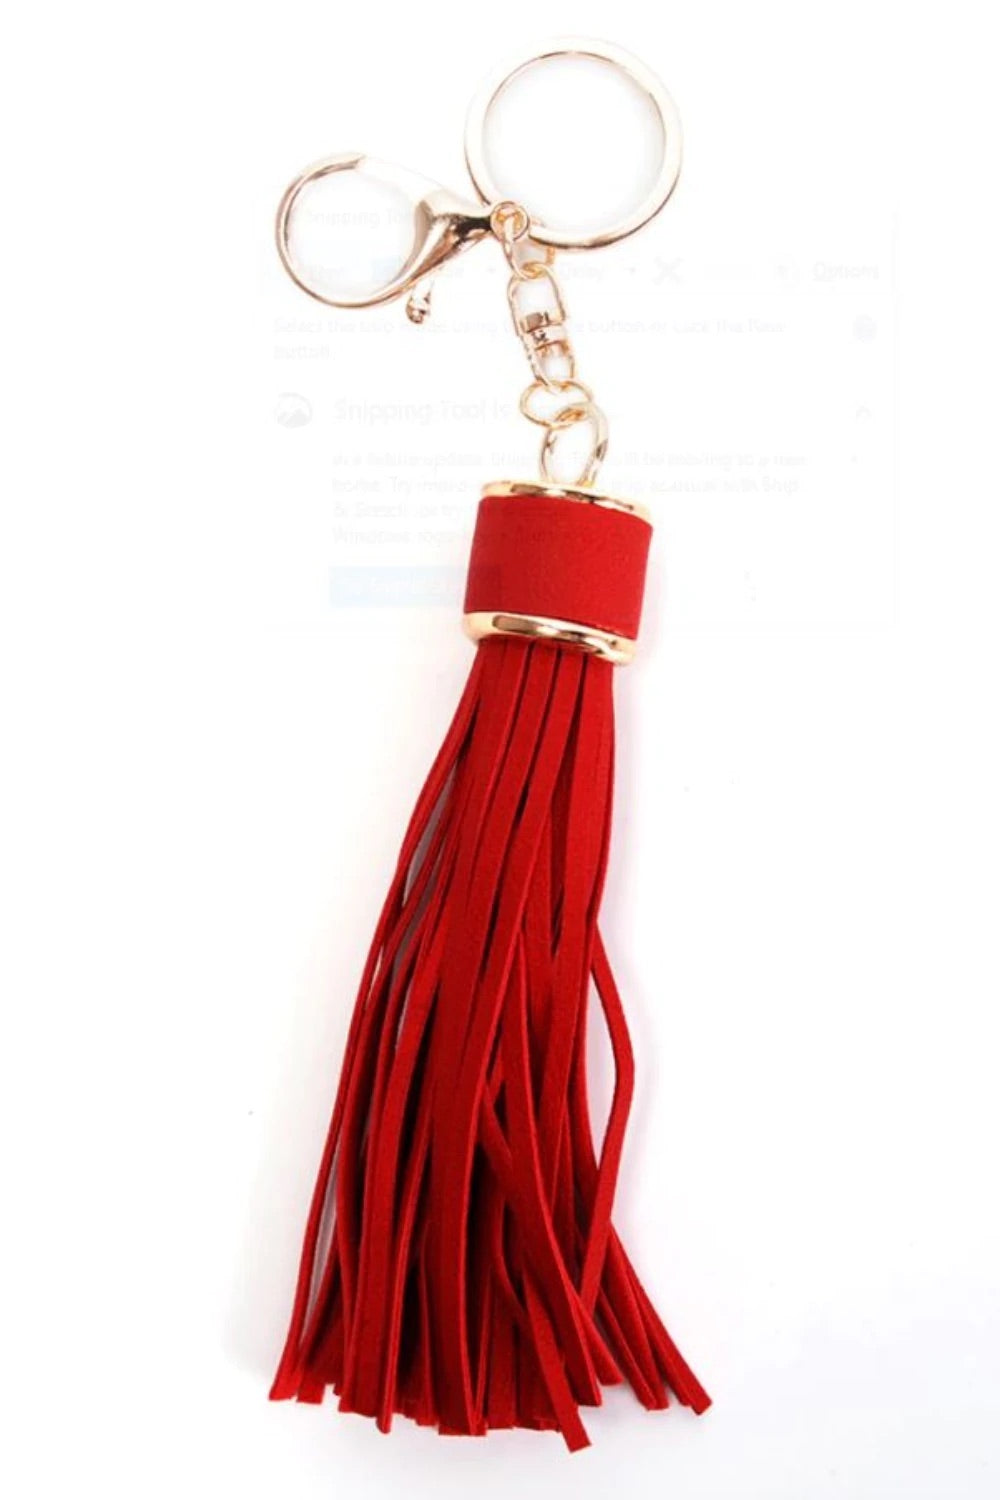 Red leather tassle with gold details